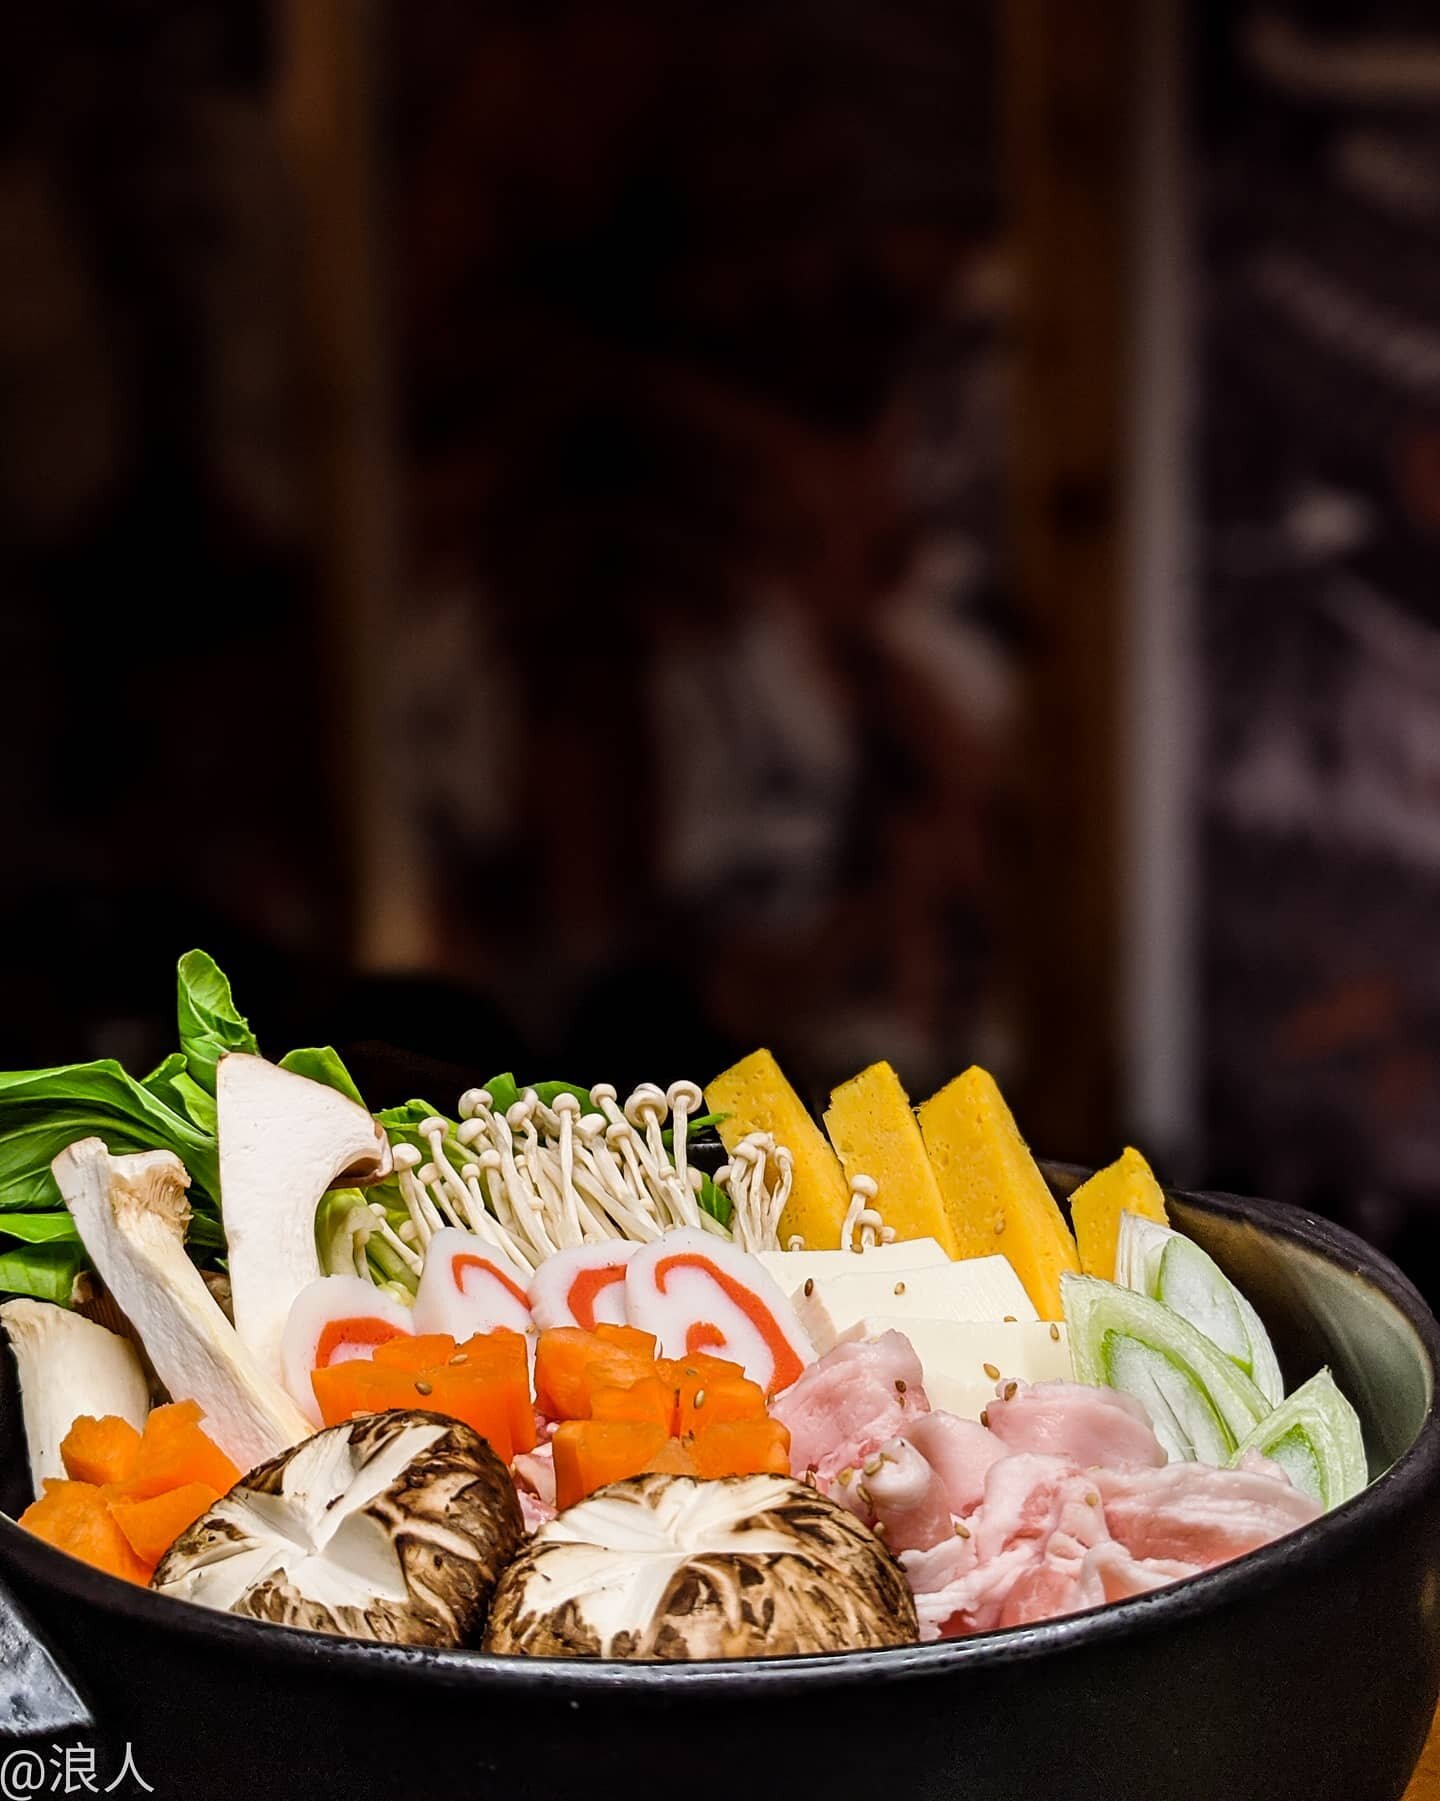 It's getting cold these days!
Chanko Nabe is now on this week's Chef's Daily!
Chicken/Pork/Seafood options available! 
Also, you may now order your food to your doorstep on our website too!
Stay tuned for more great news and deals!
➡️For our menu &am